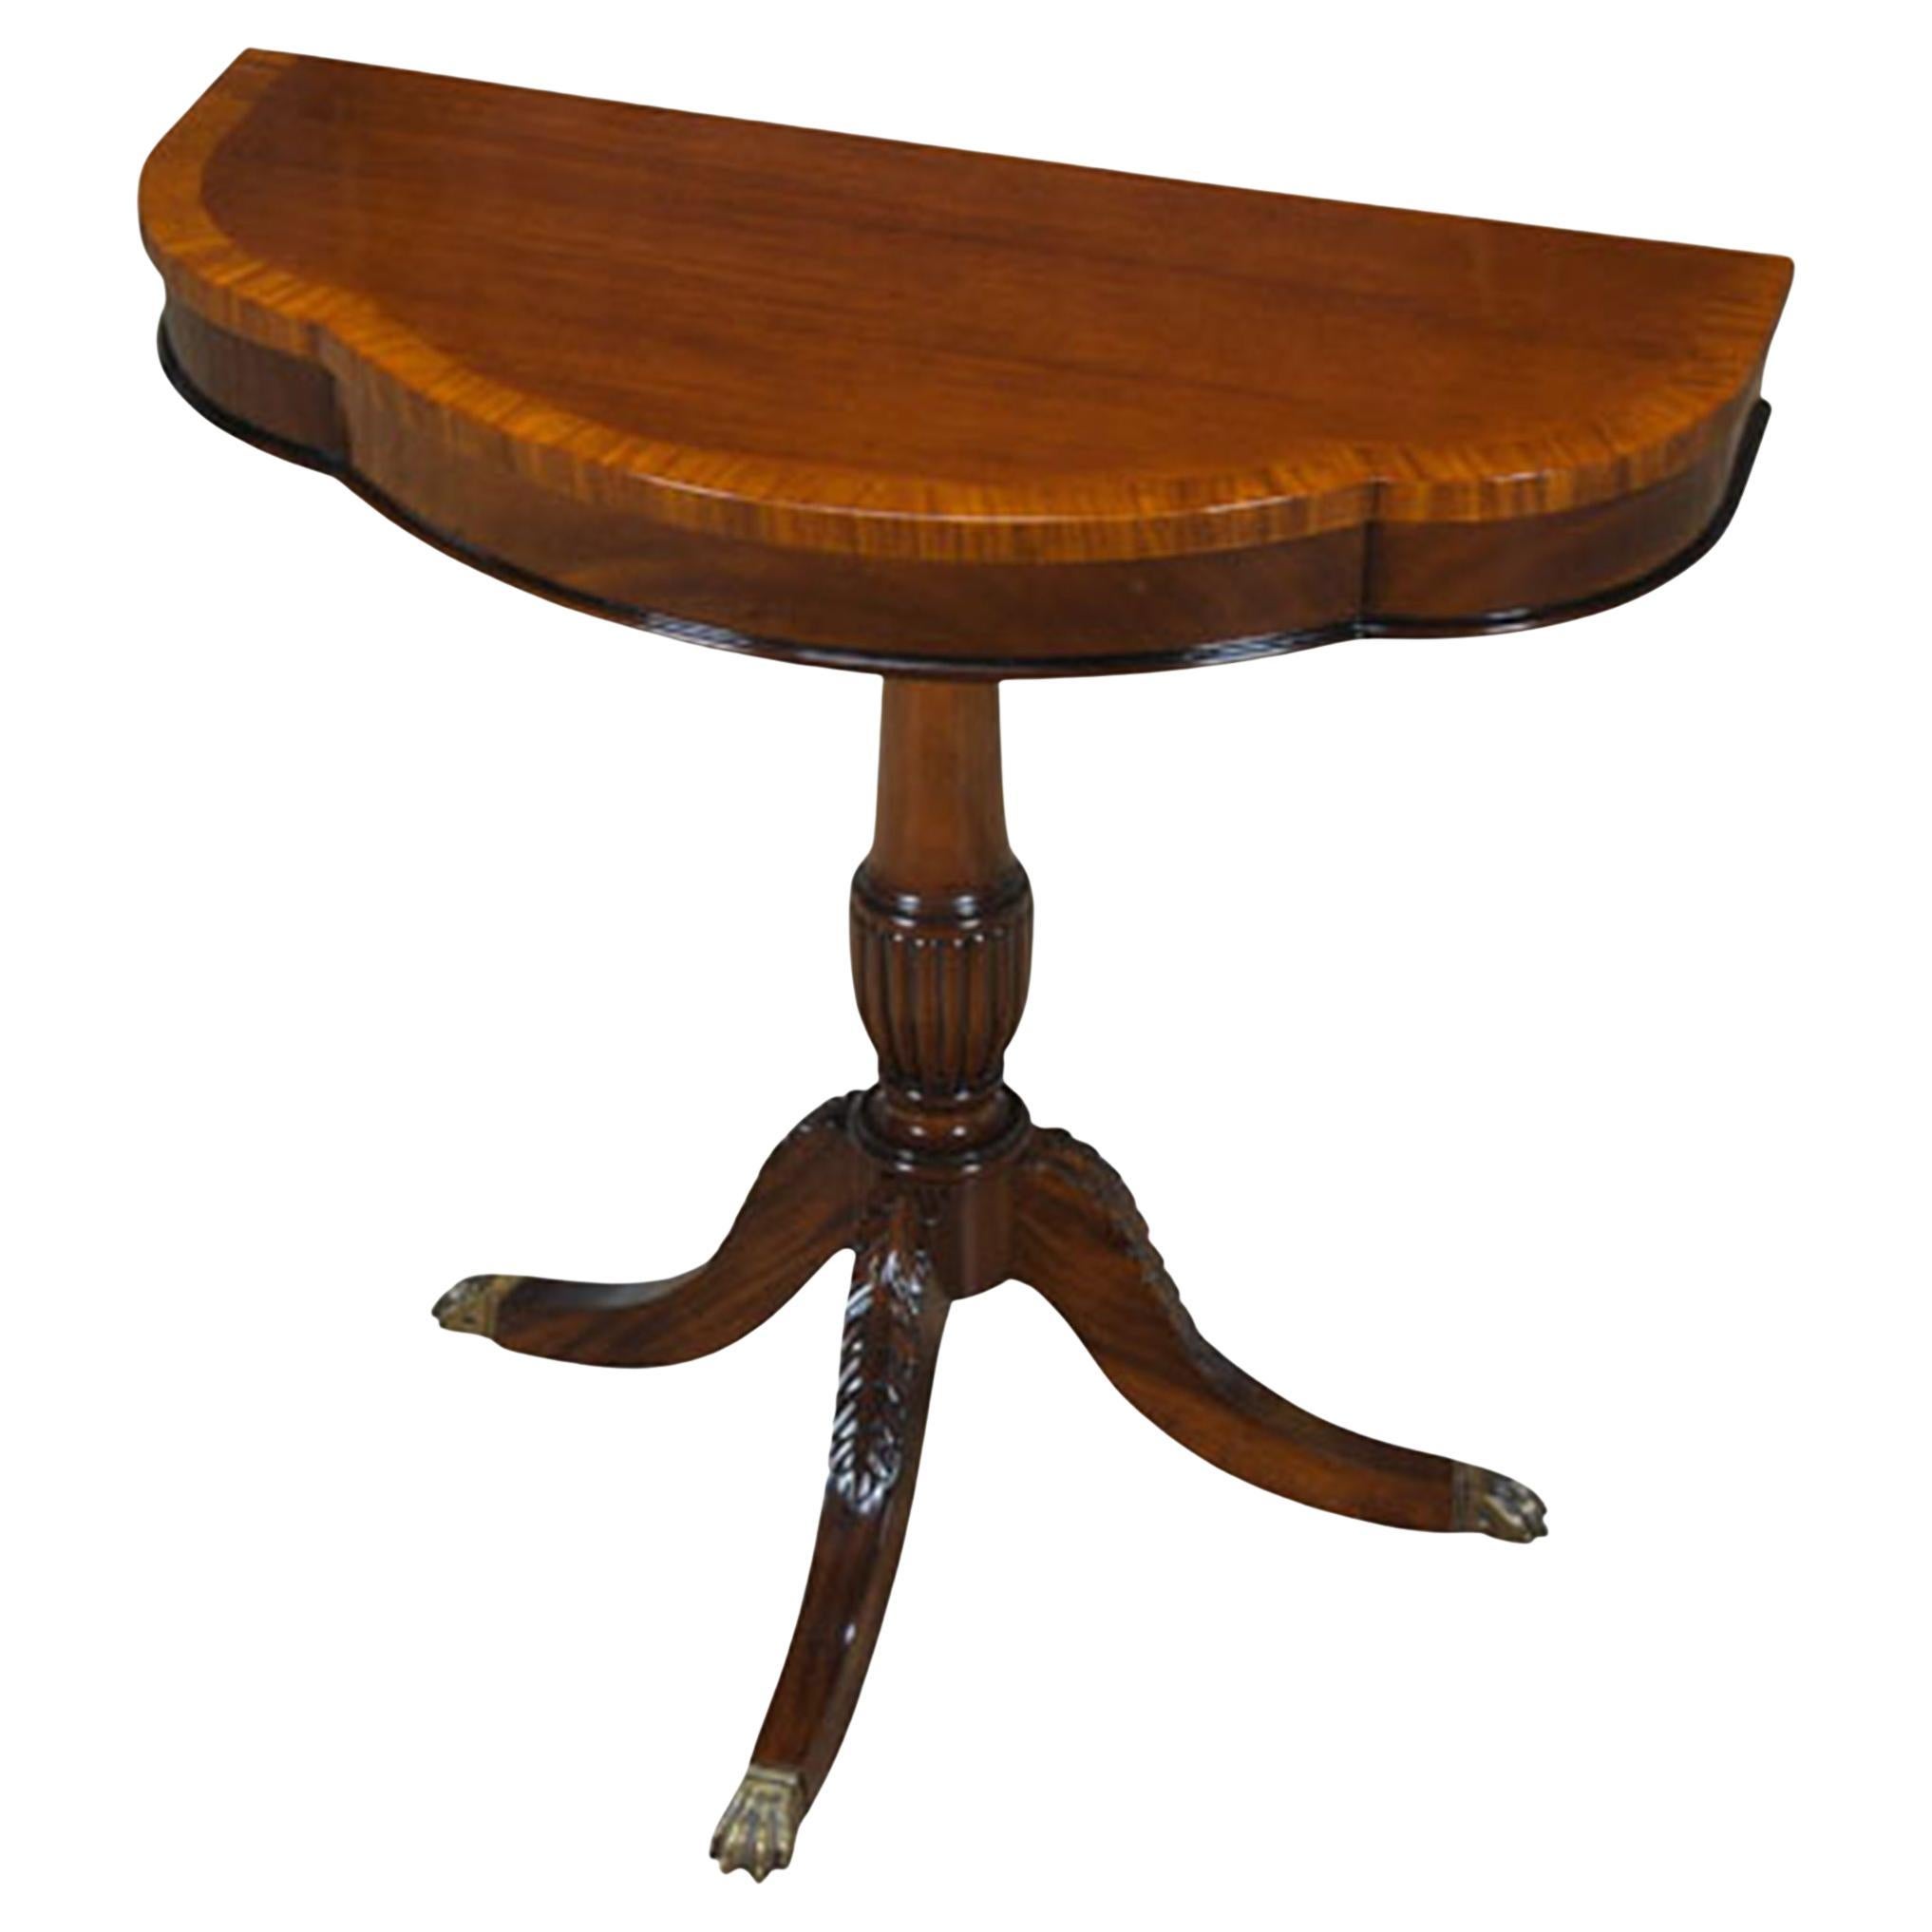 How can I identify my antique dining table?